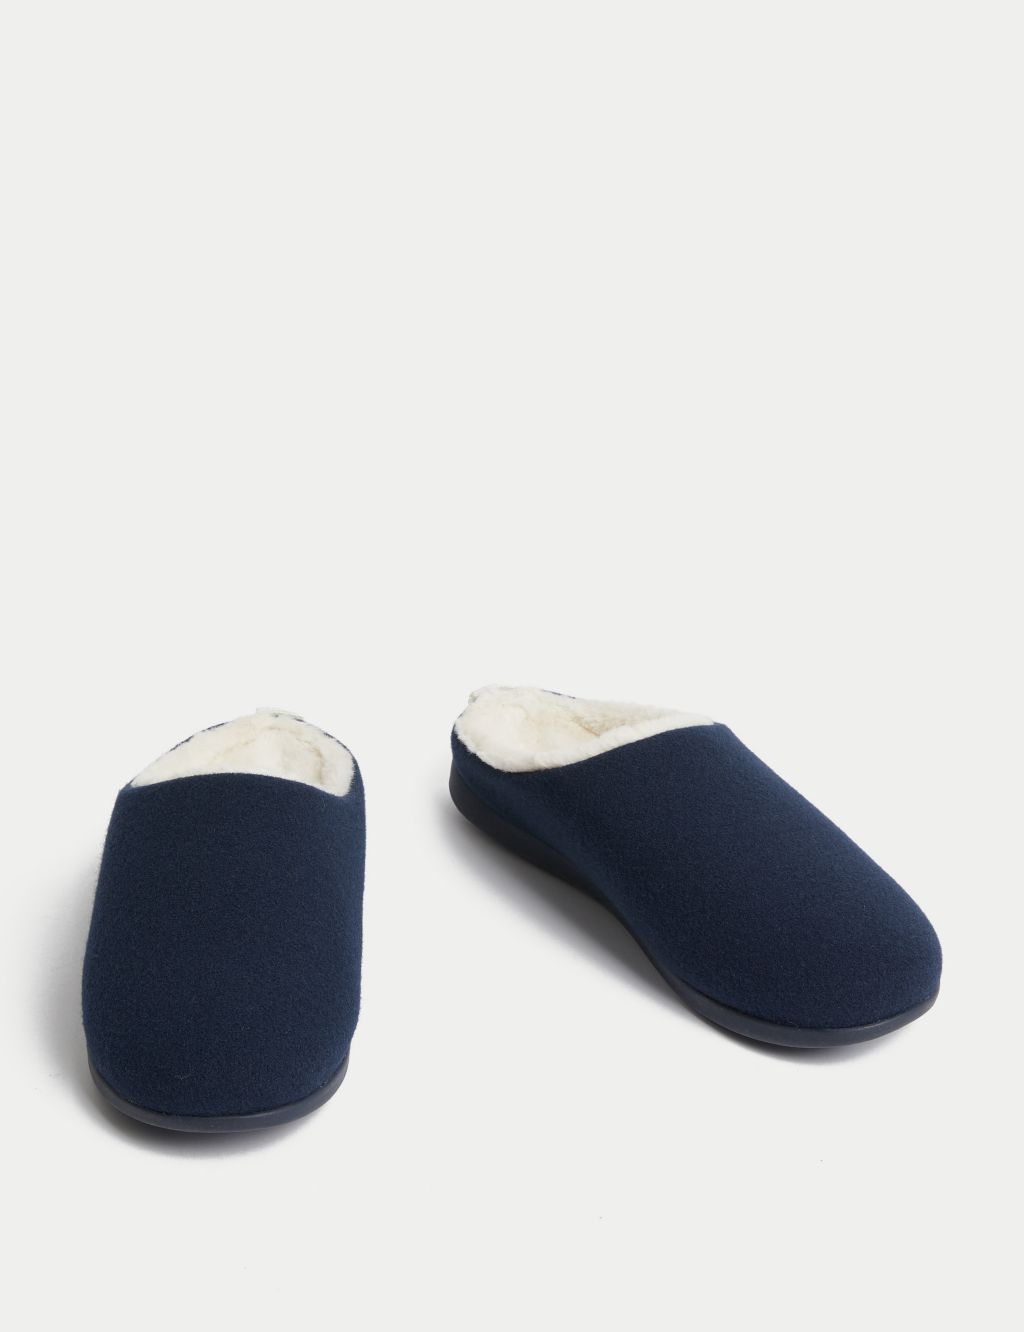 Mule Slippers with Secret Support image 2